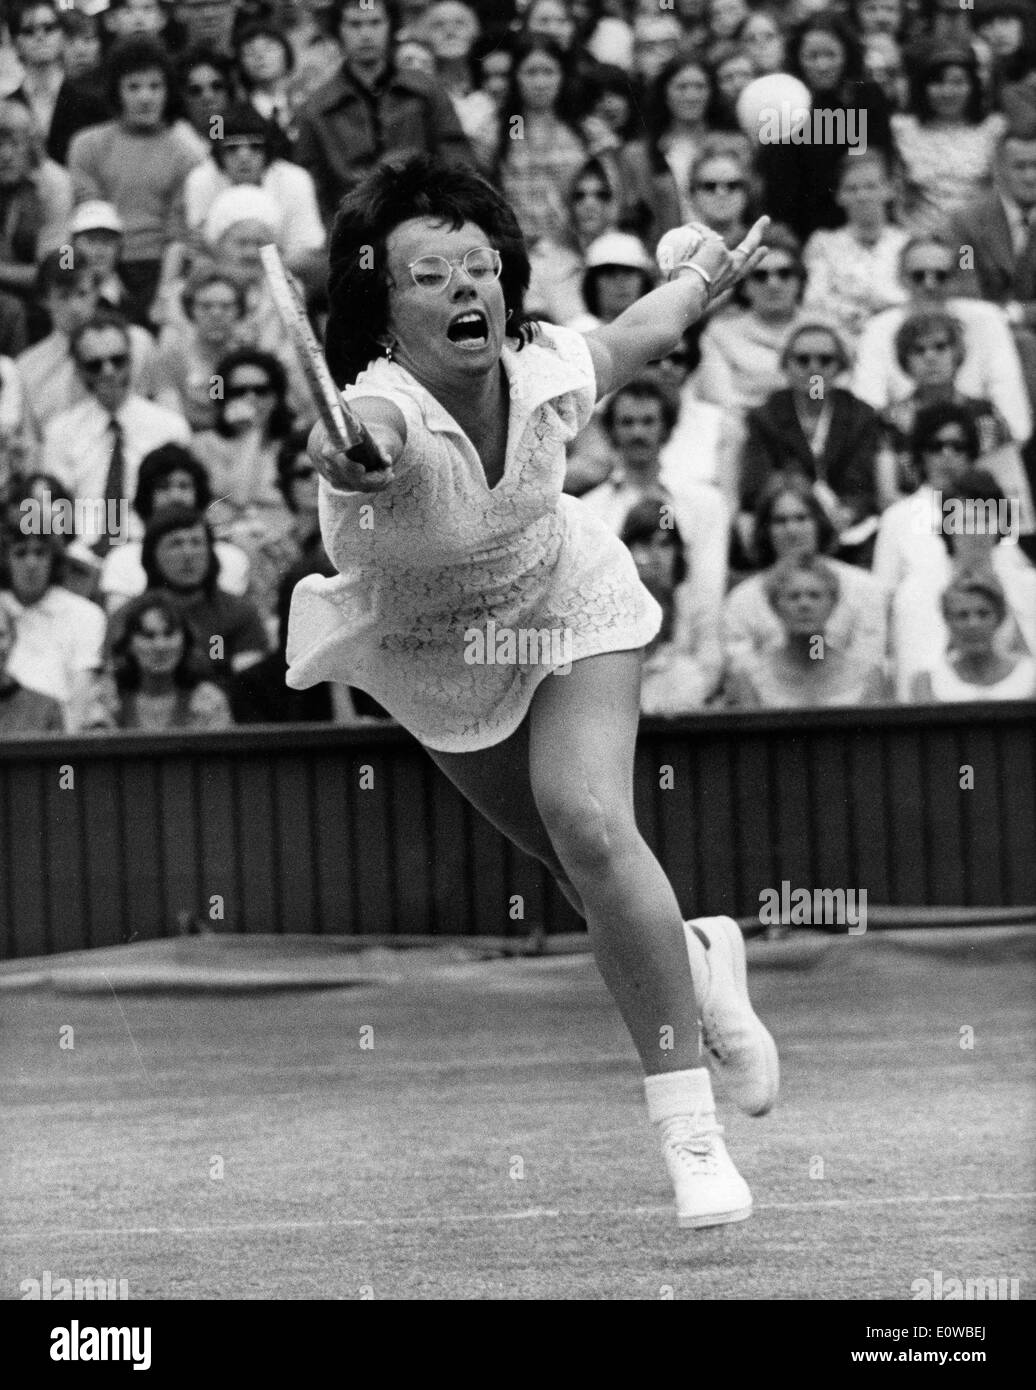 Billie Jean King playing in a tennis match Stock Photo